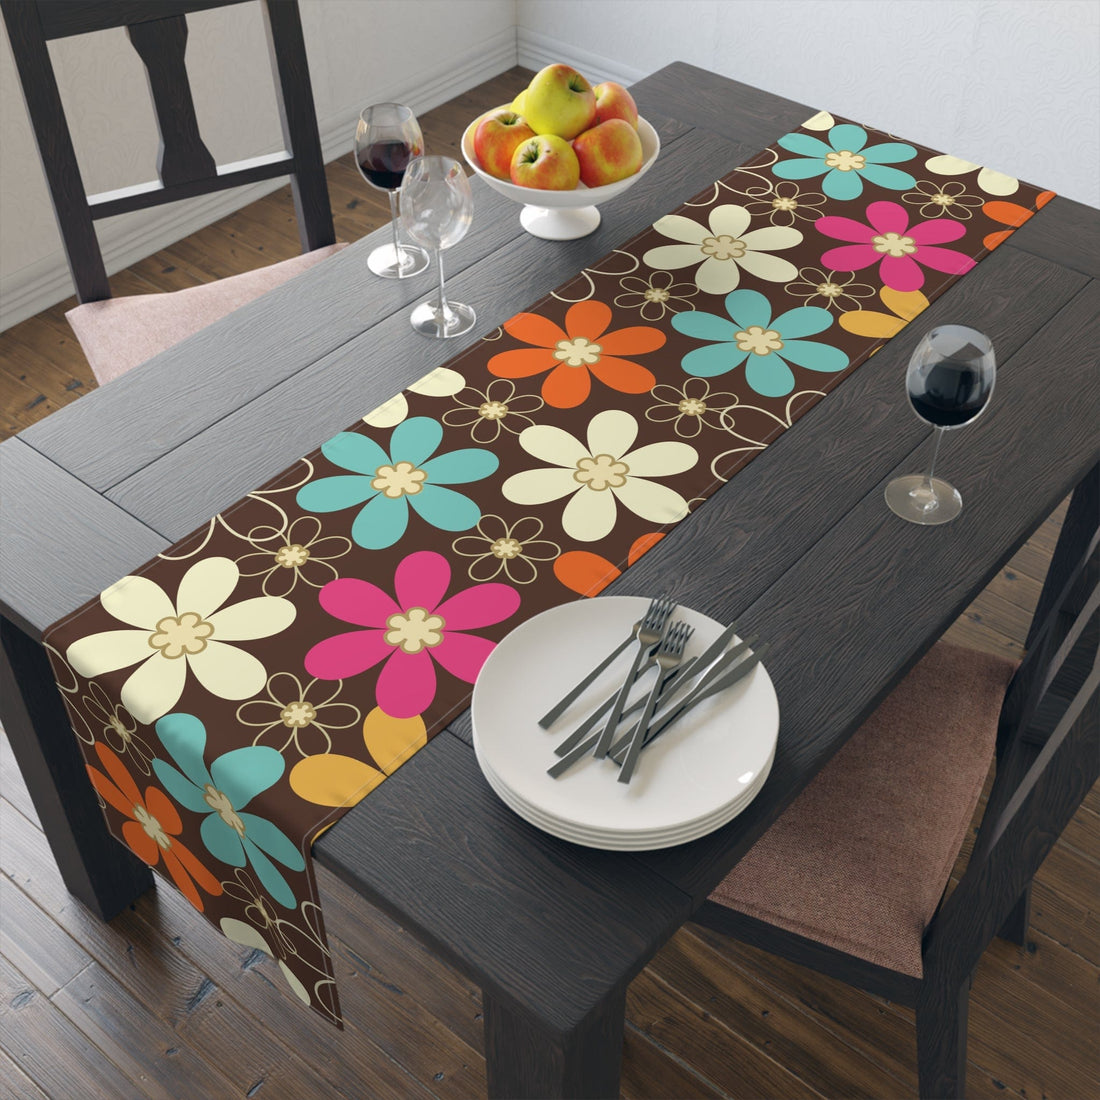 Kate McEnroe New York 70s Retro Groovy Hippie Flower Power Table Runner, Mid Century Modern Teal, Orange, Pink, Chocolate Floral Table Linens Table Runners 16&quot; × 72&quot; / Cotton Twill 29601855344989736549